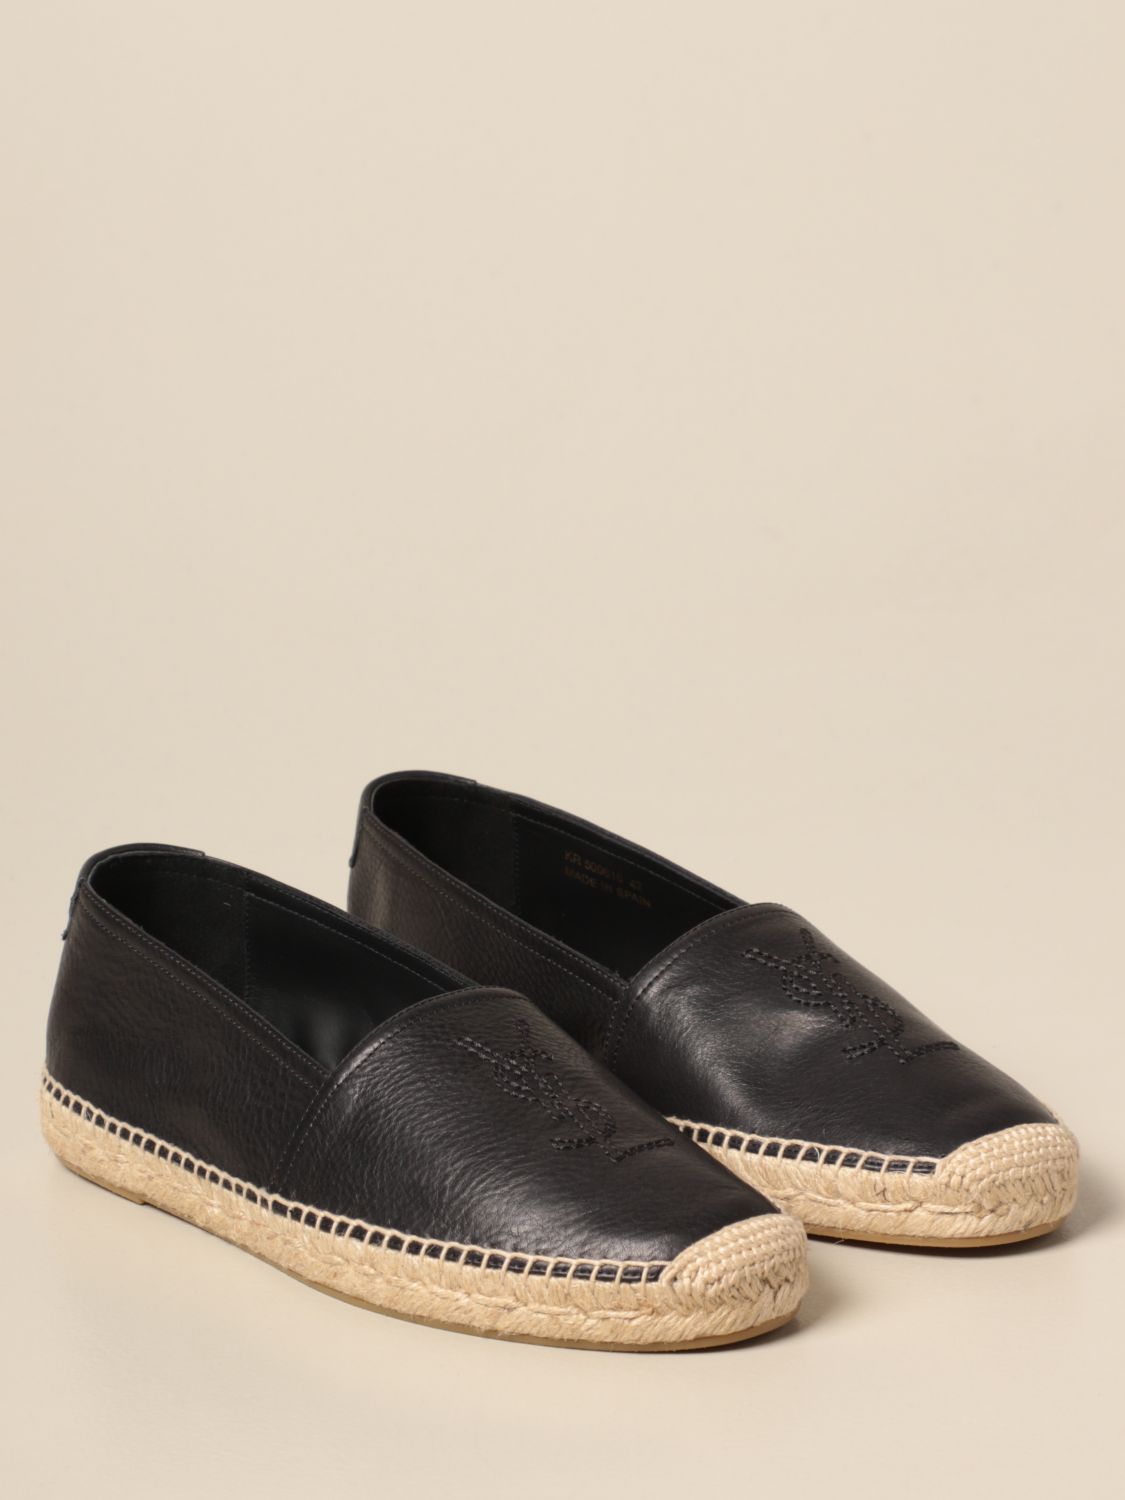 Saint Laurent espadrilles in grained leather with stitched logo